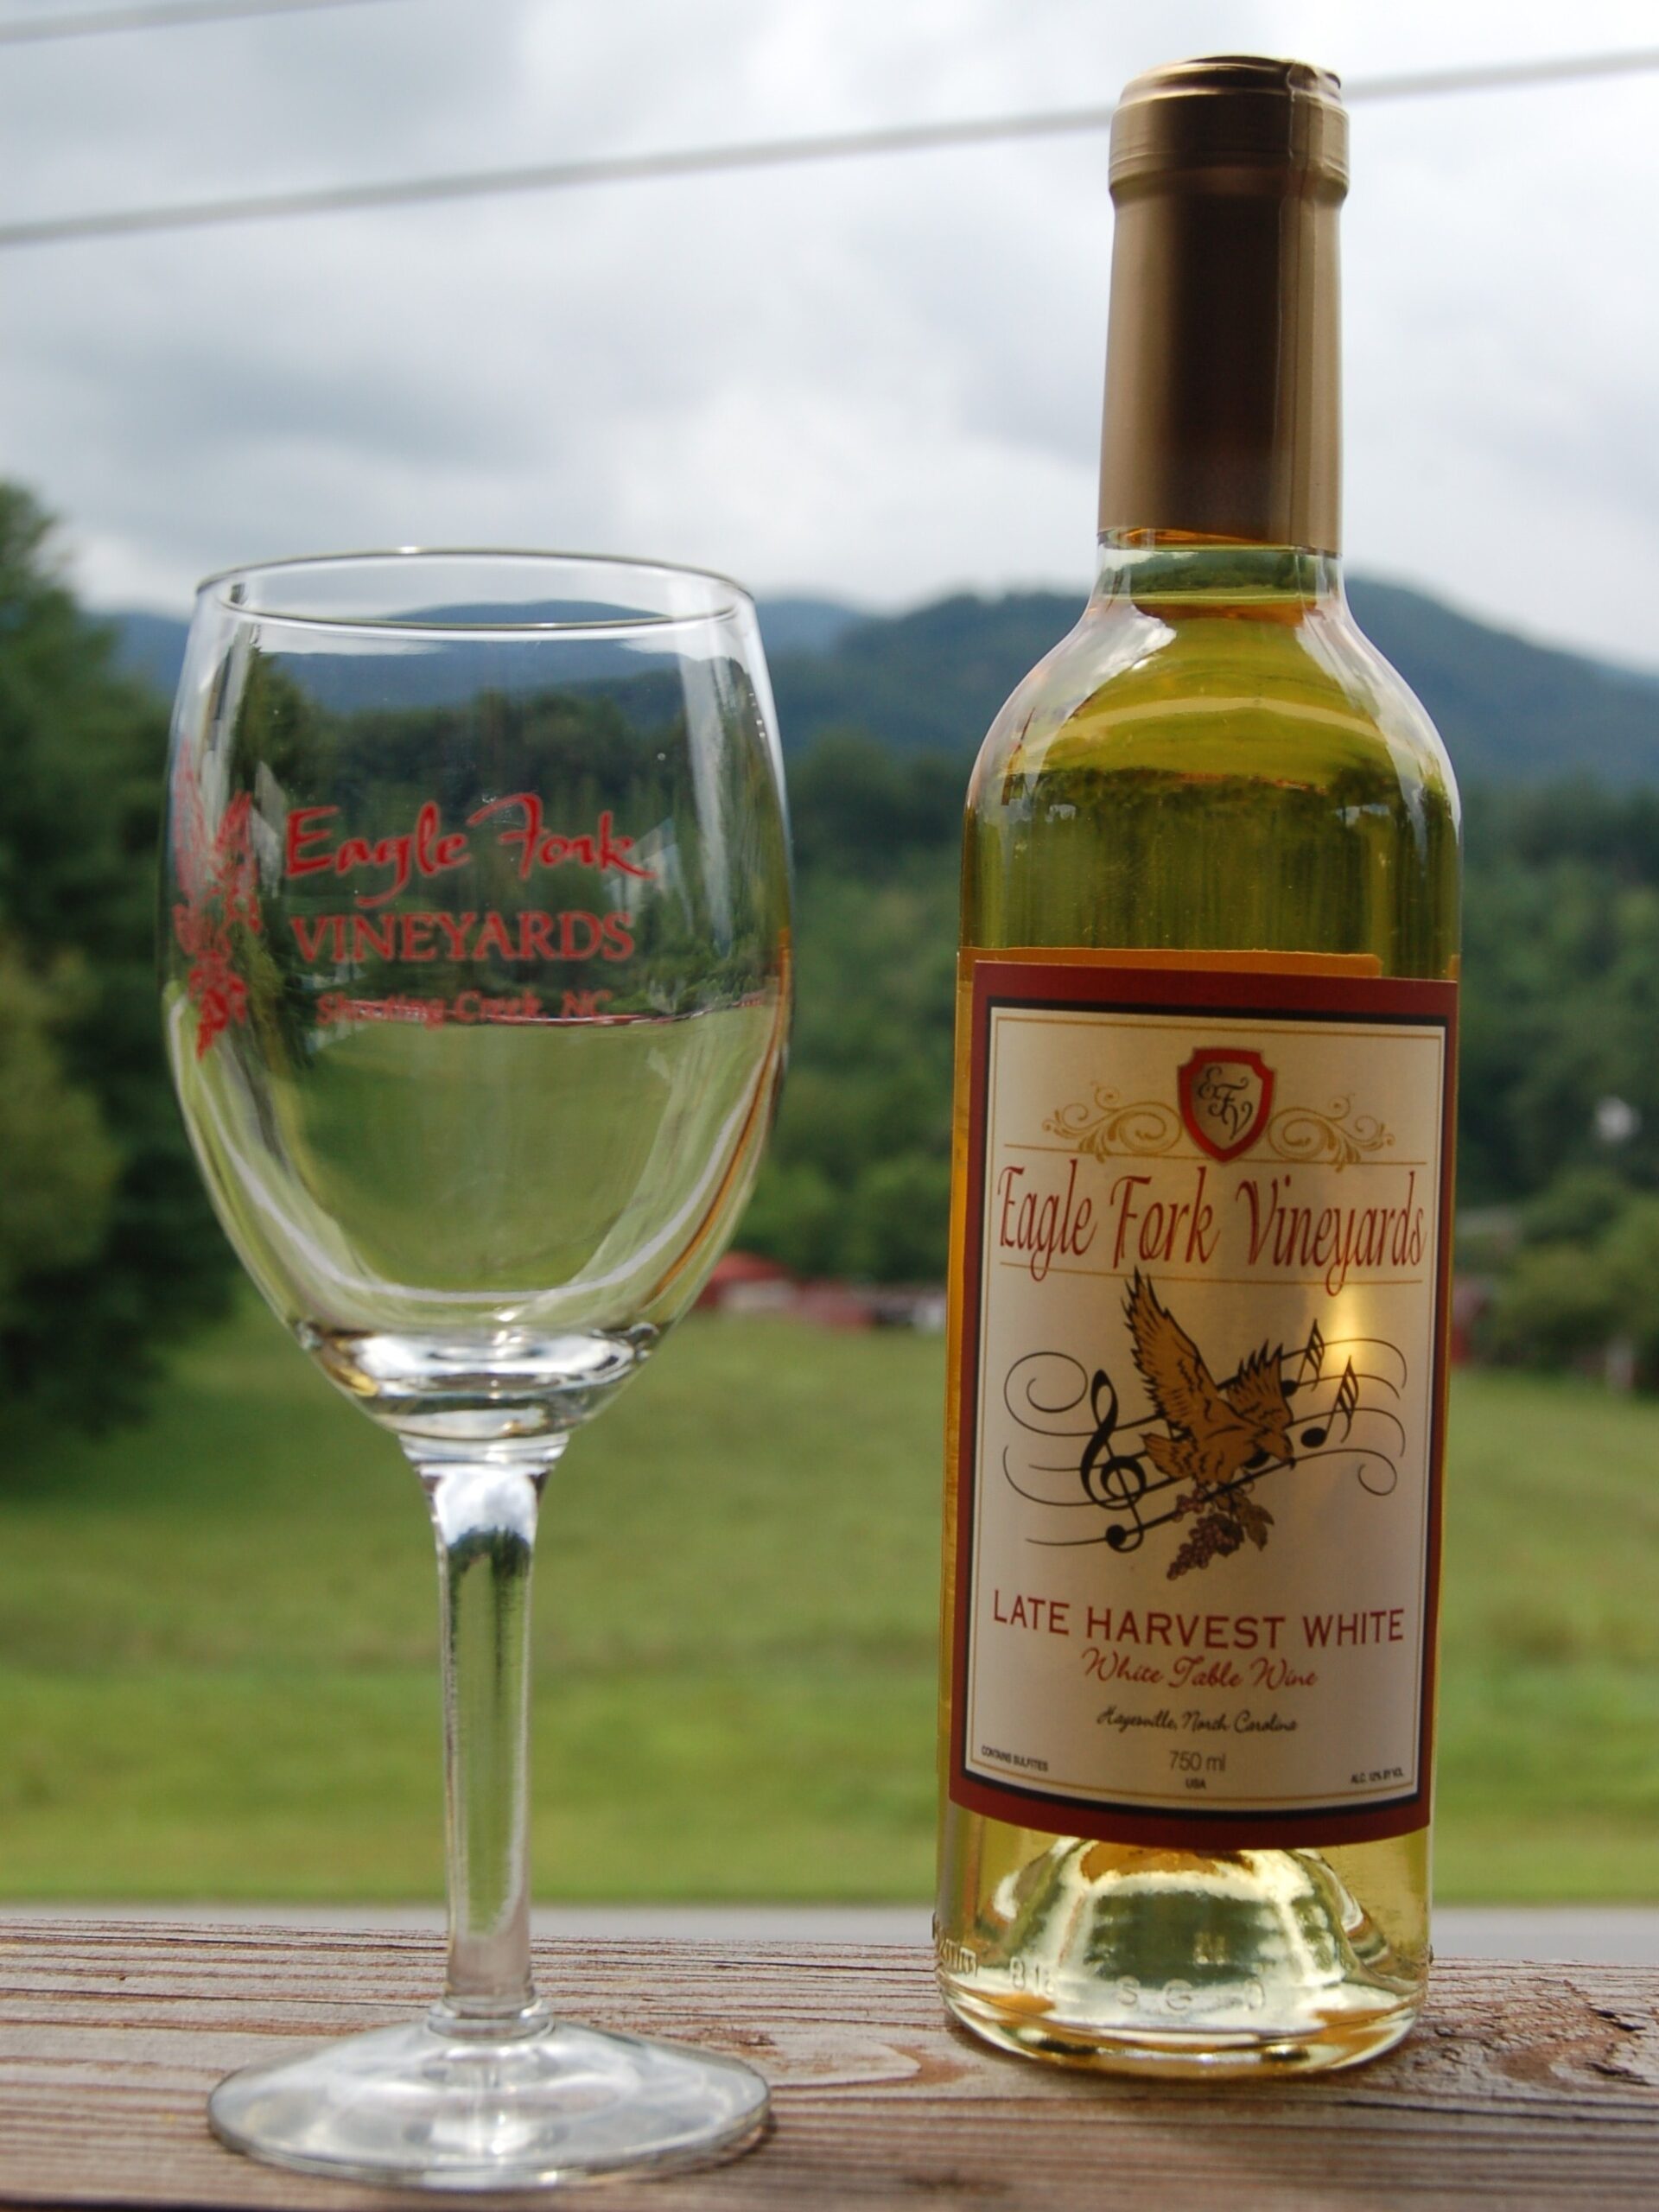 This richly sweet wine is harvested very late in the season to capture all the natural sugars and flavors of the season. Petite Monsing, one of the two grapes that can be harvested so late, delights the taste buds with stonefruit characteristics such as peach and apricot, citrus and Sweet spice.